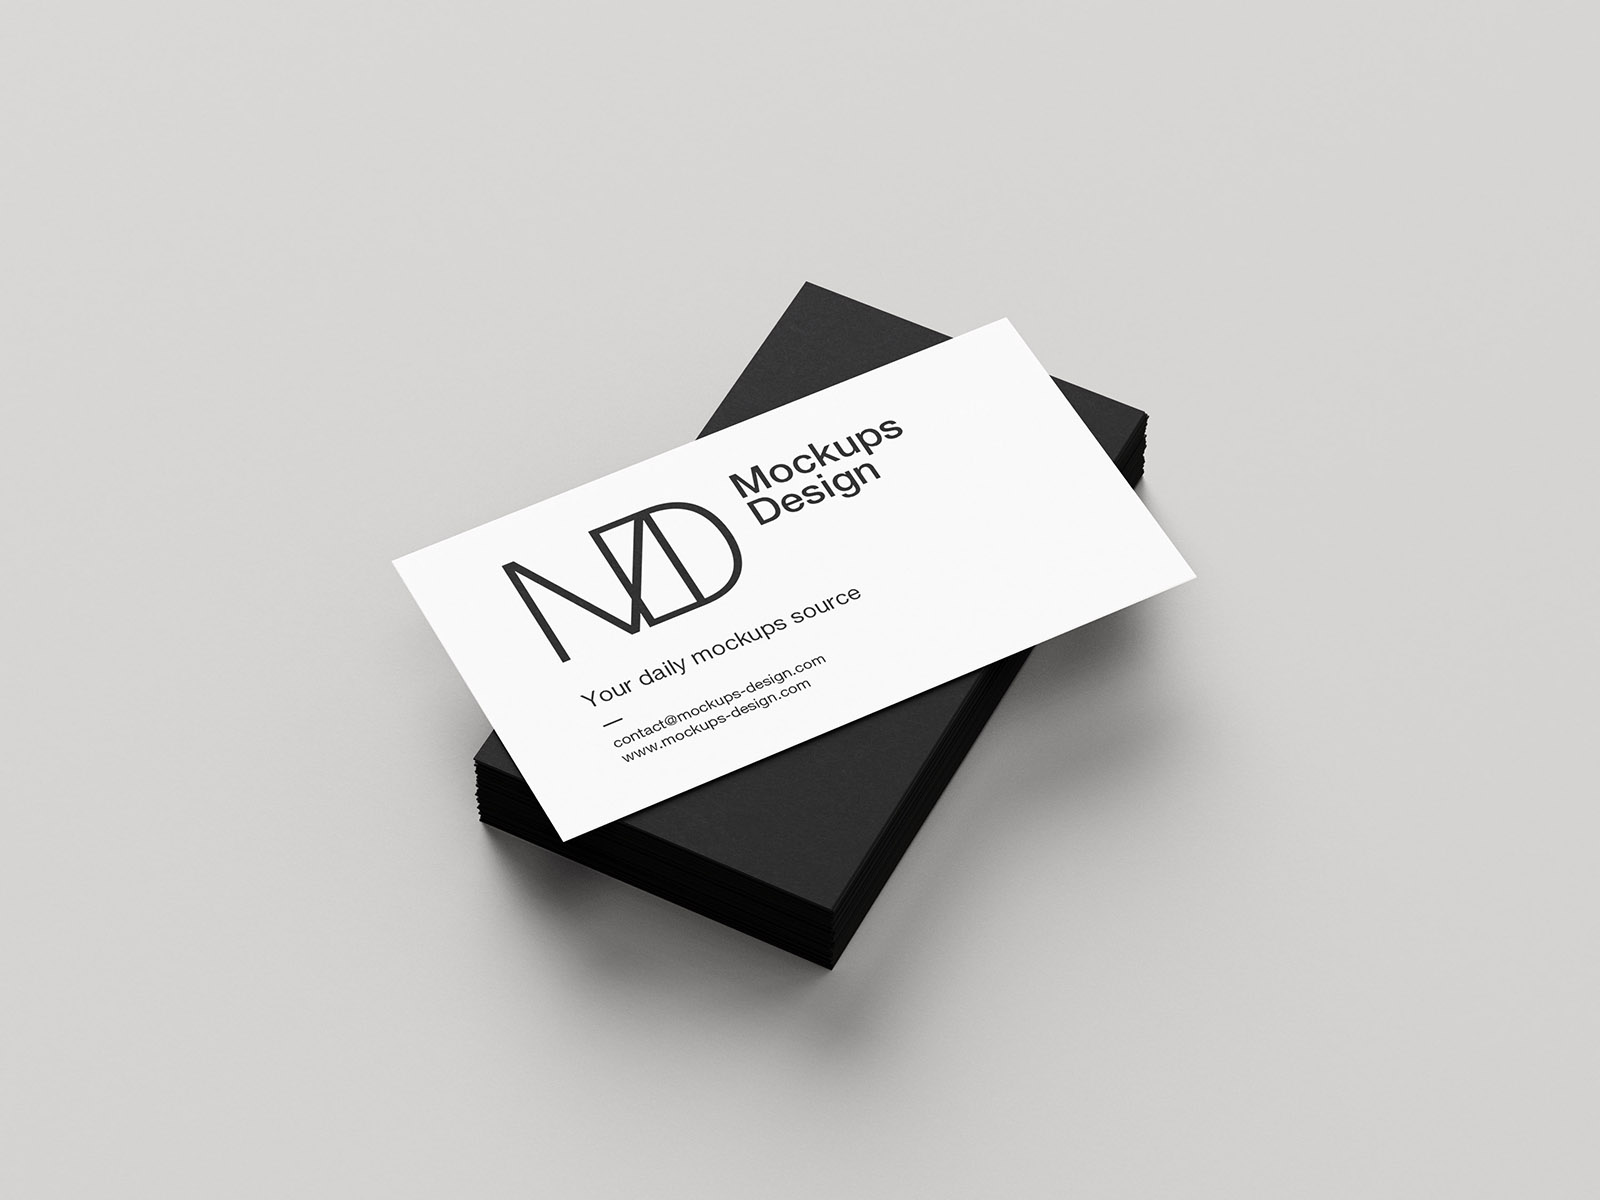 Clean business cards mockup / 90x50mm